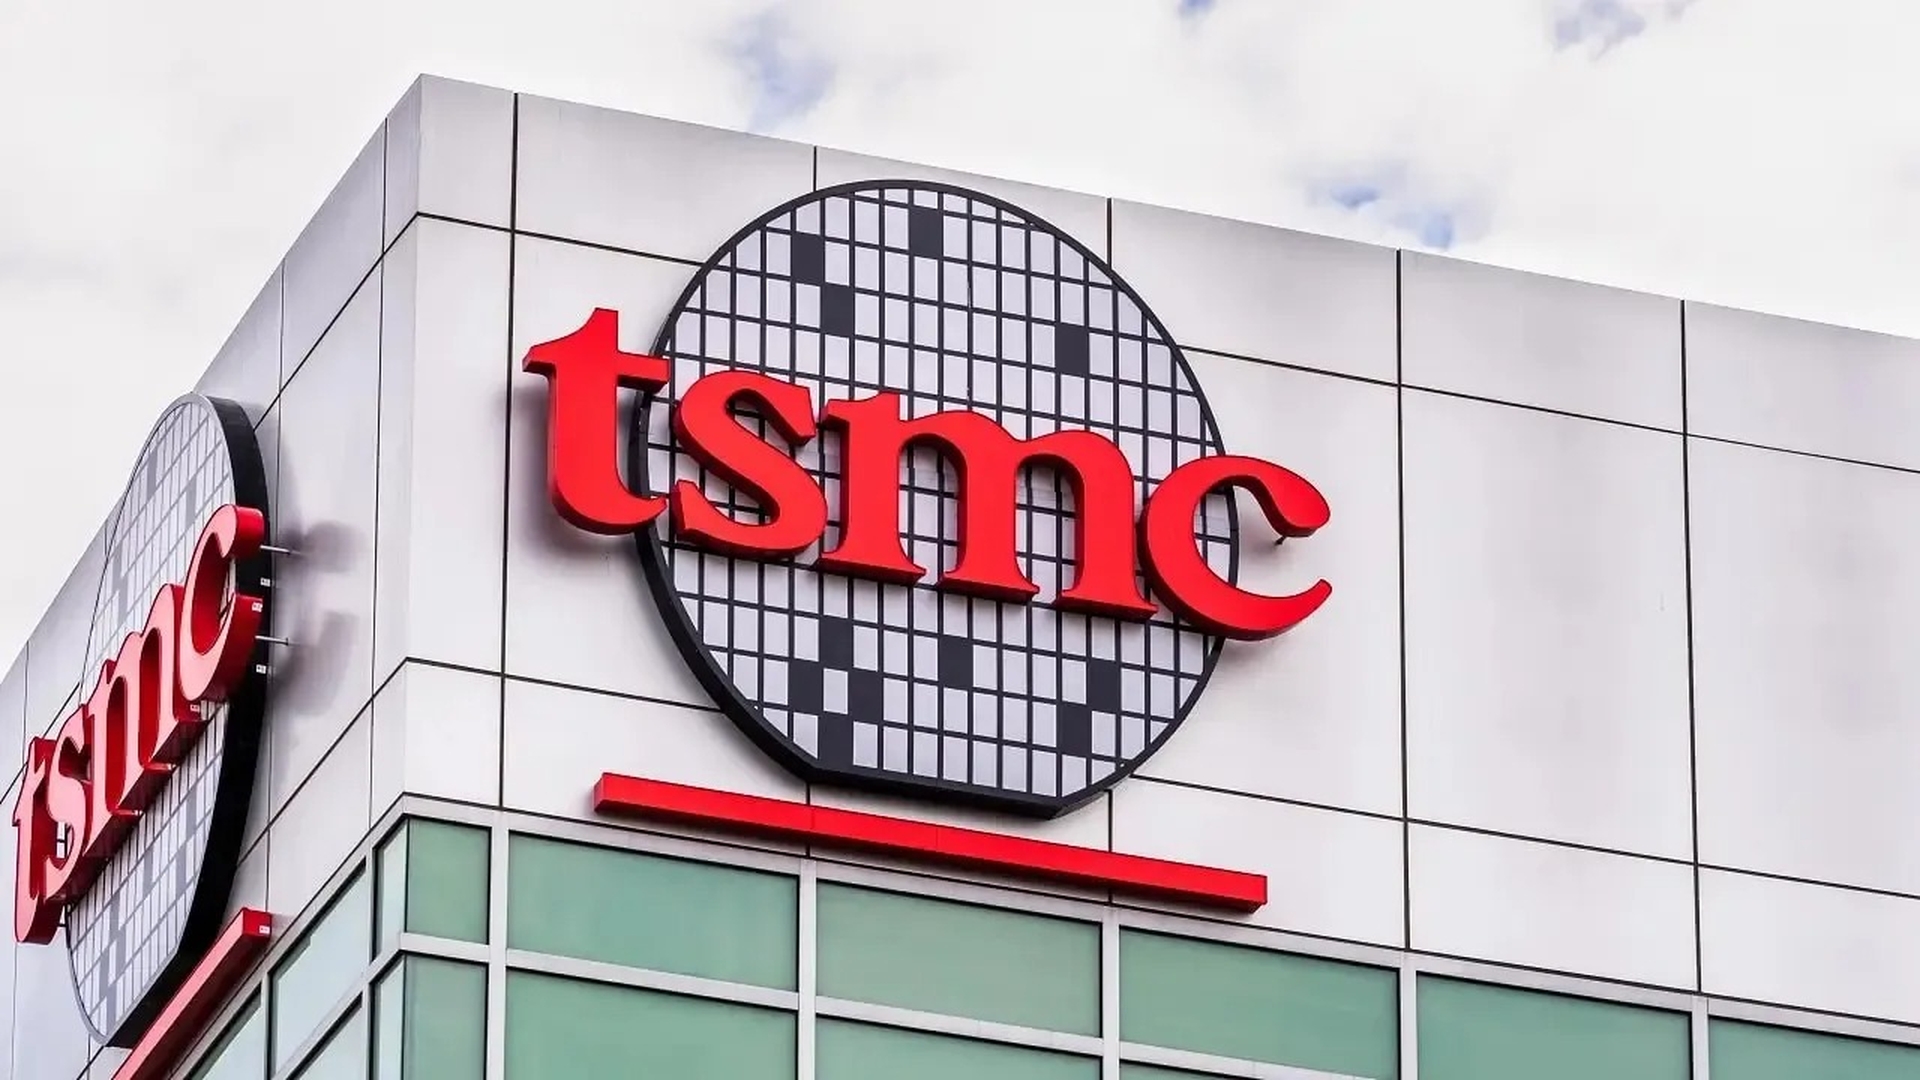 In this article, we are going to cover the new multibillion-dollar TSMC Singapore plant that might be built according to WSJ.